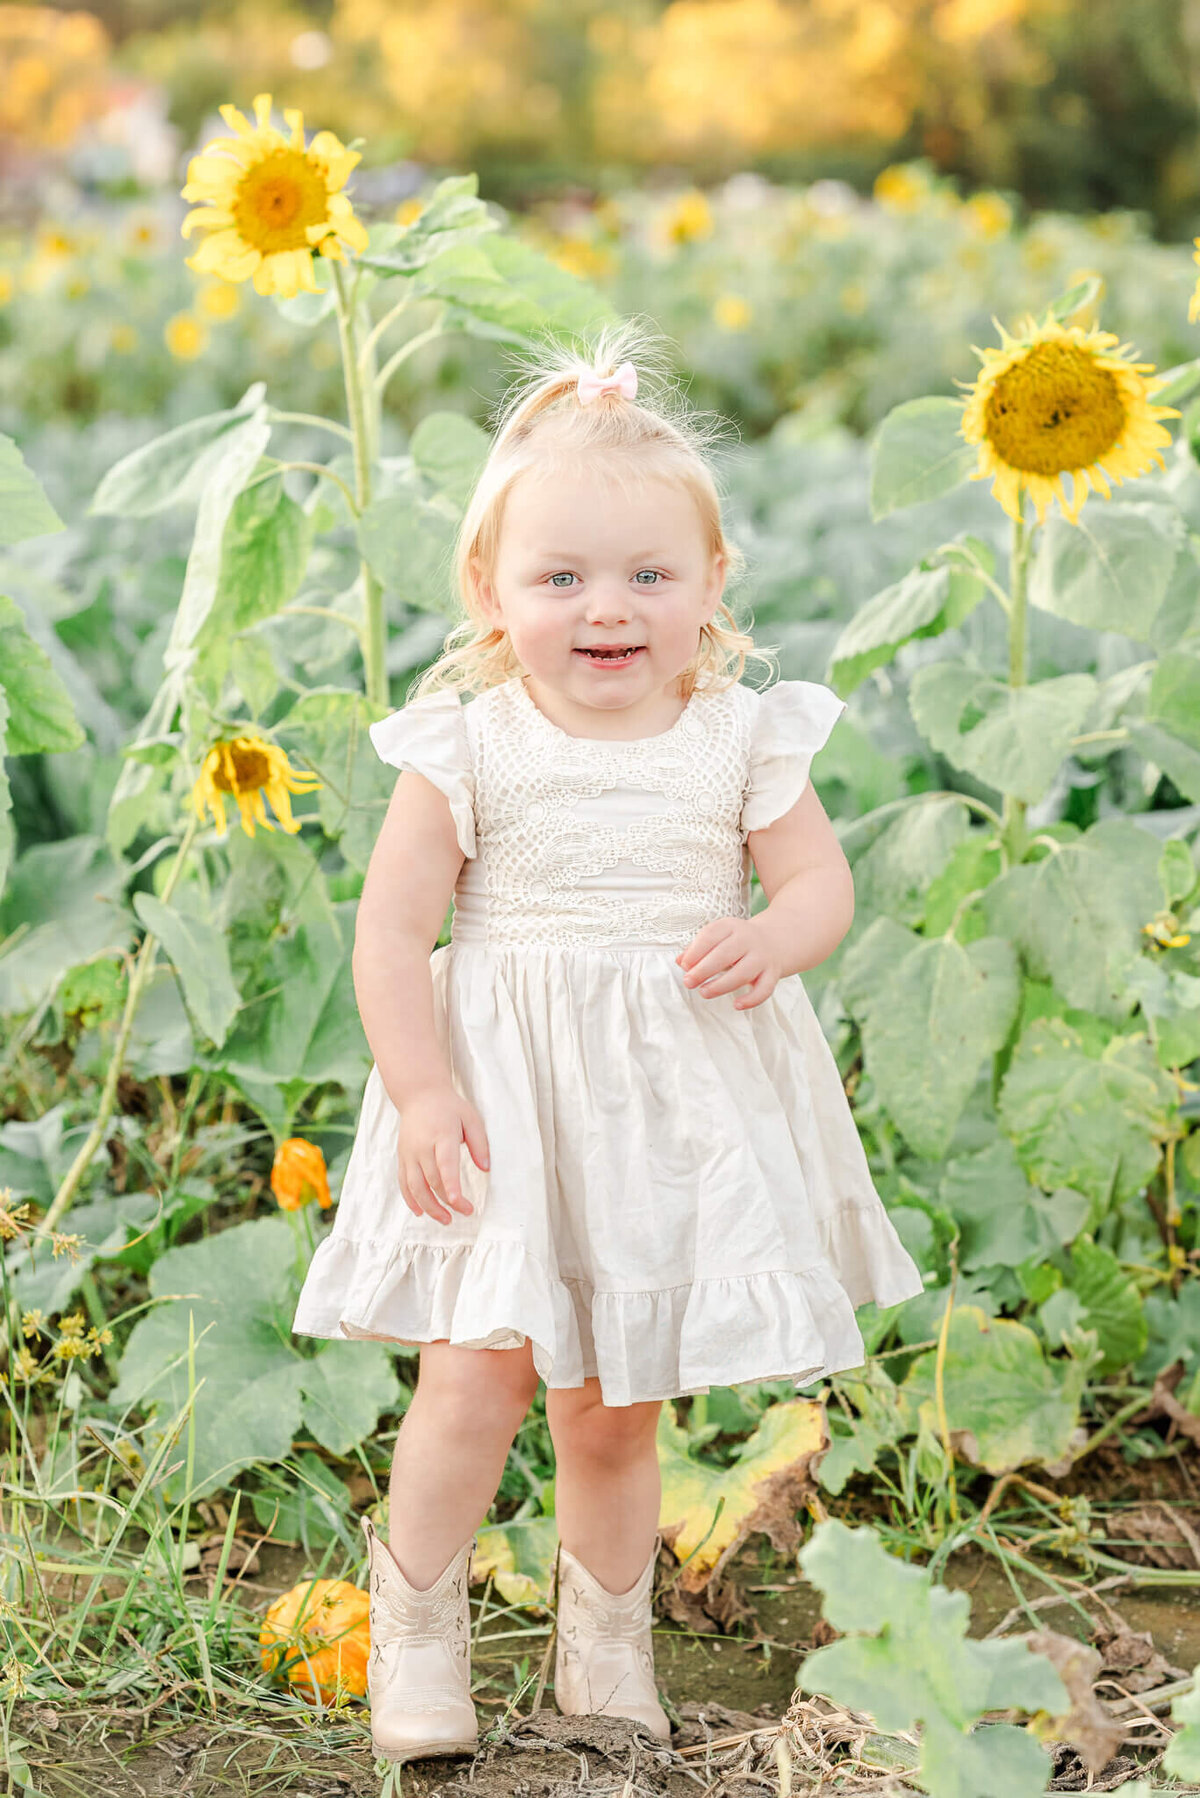 A toddler girl wearing  a white dress and cowgirl boots stands in a field of sunflowers.